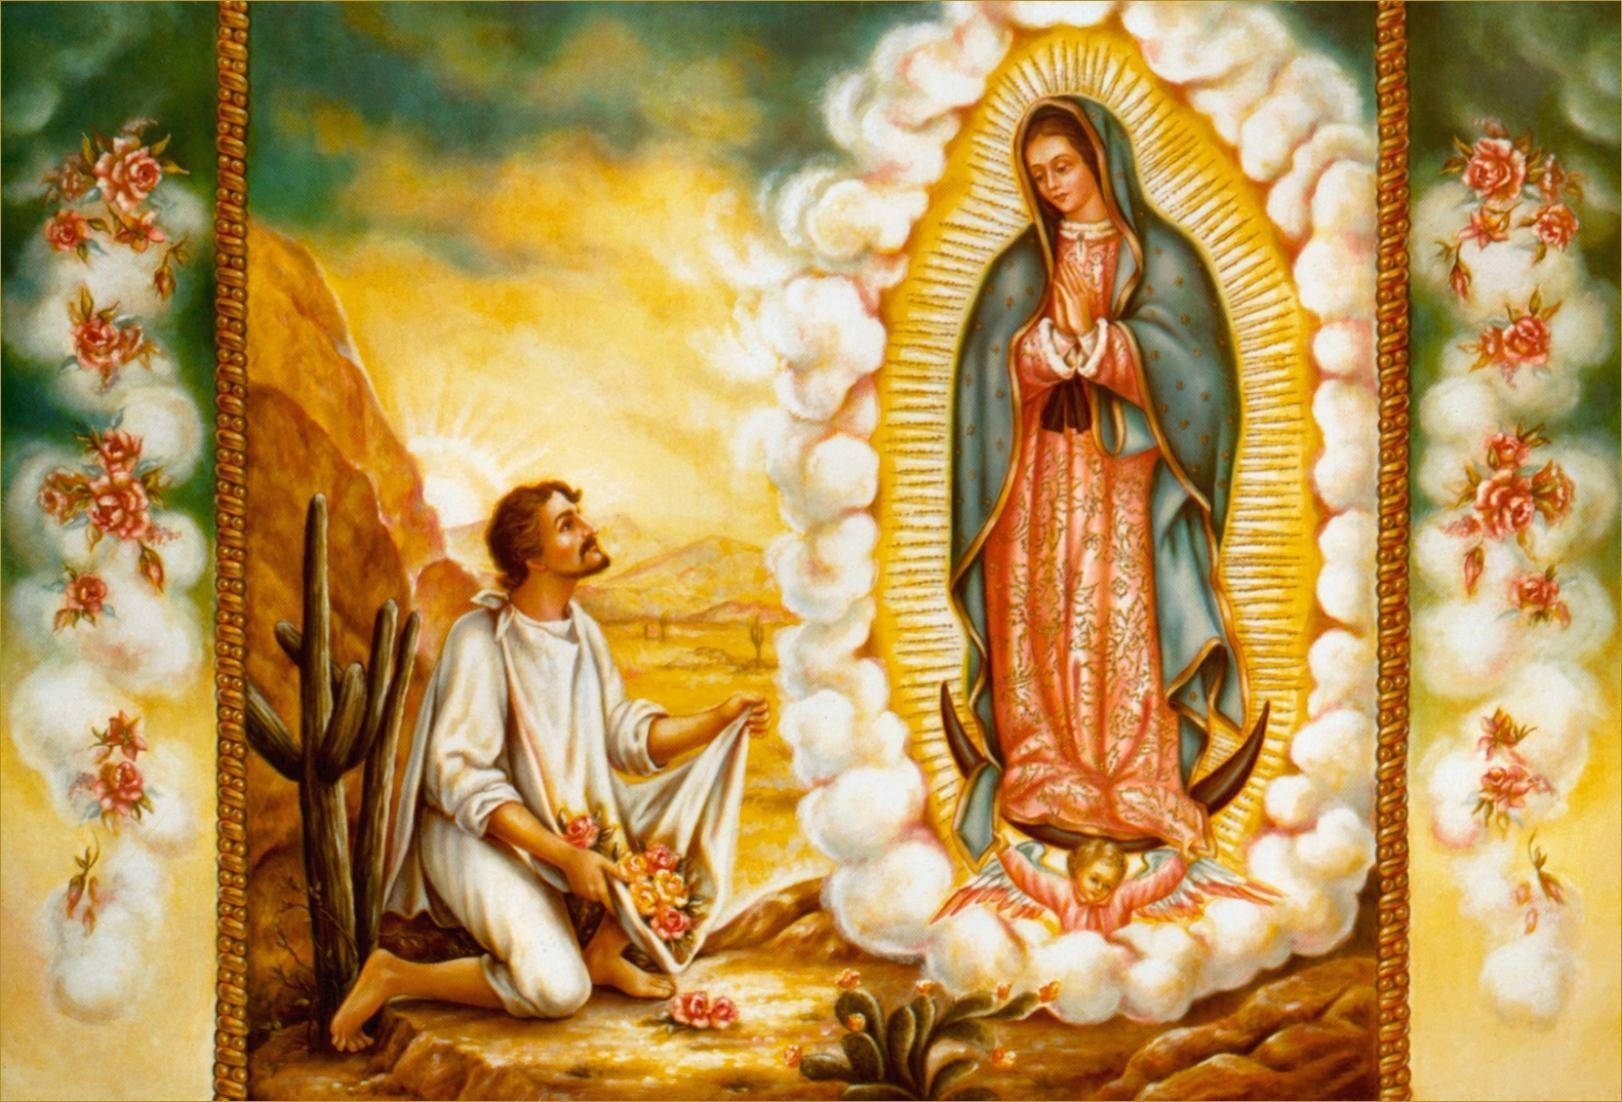 The Vibrant Image Of Virgen De Guadalupe With St. Juan Diego. Wallpaper